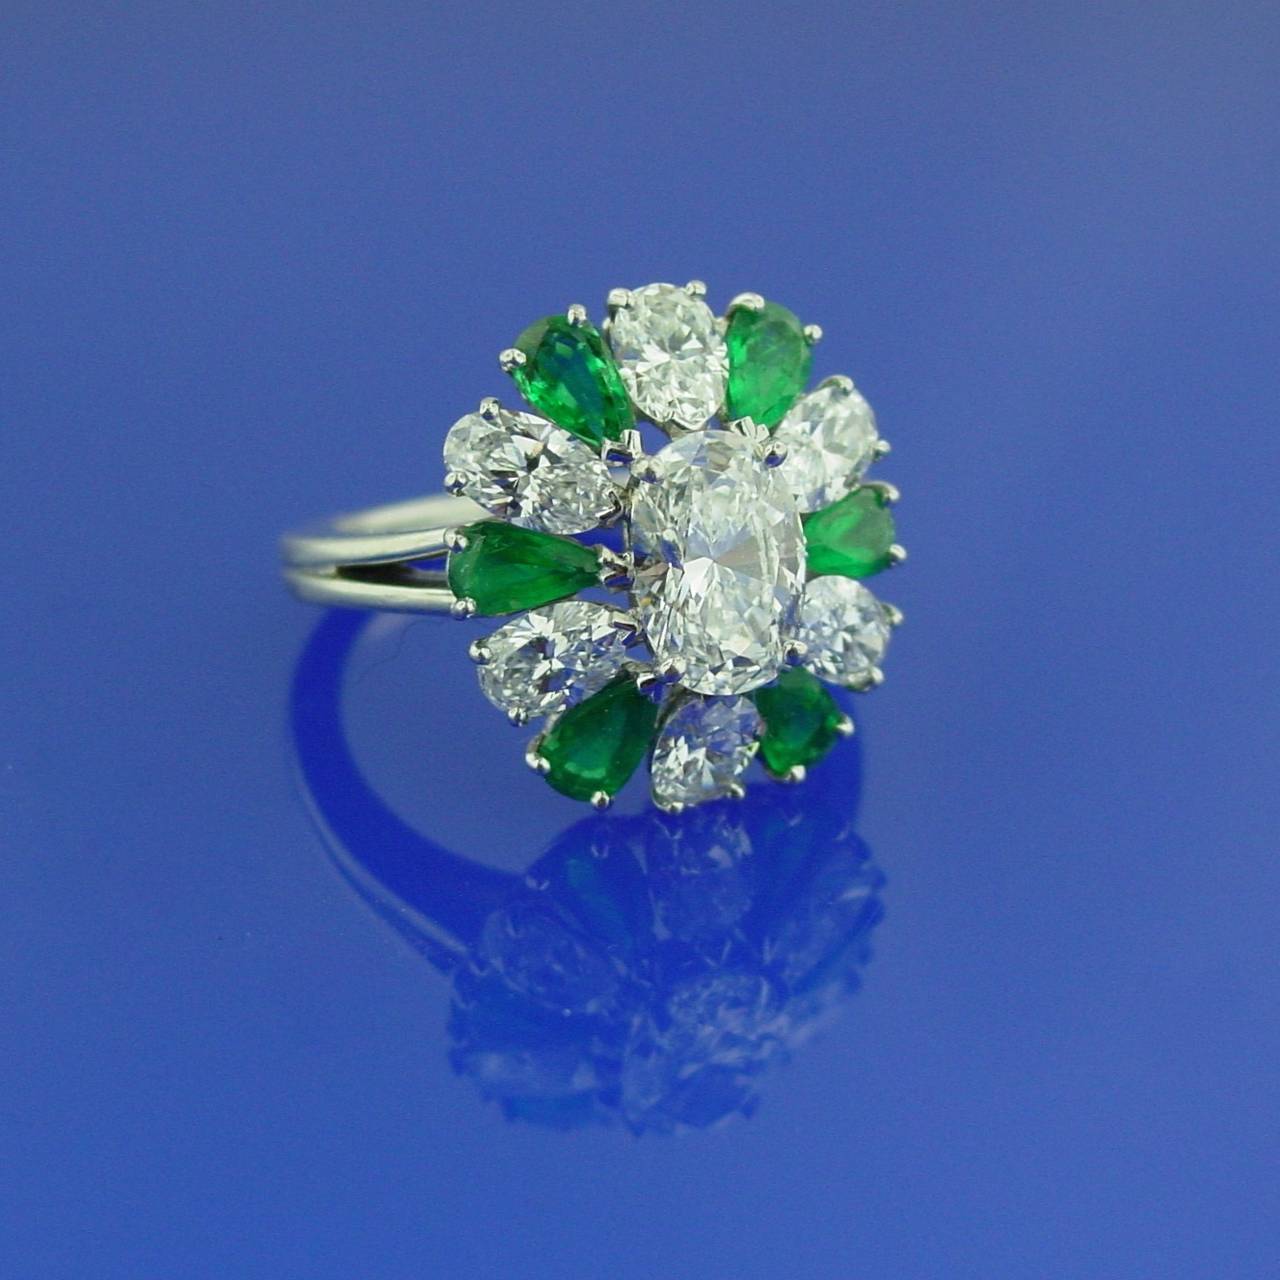 A classic Oscar Heyman emerald and diamond ring featuring a center oval shaped diamond surrounded by pear shaped emeralds and oval diamonds, mounted in platinum. The ring is set with approximately 2.50 carats of diamonds and approximately .90 carats